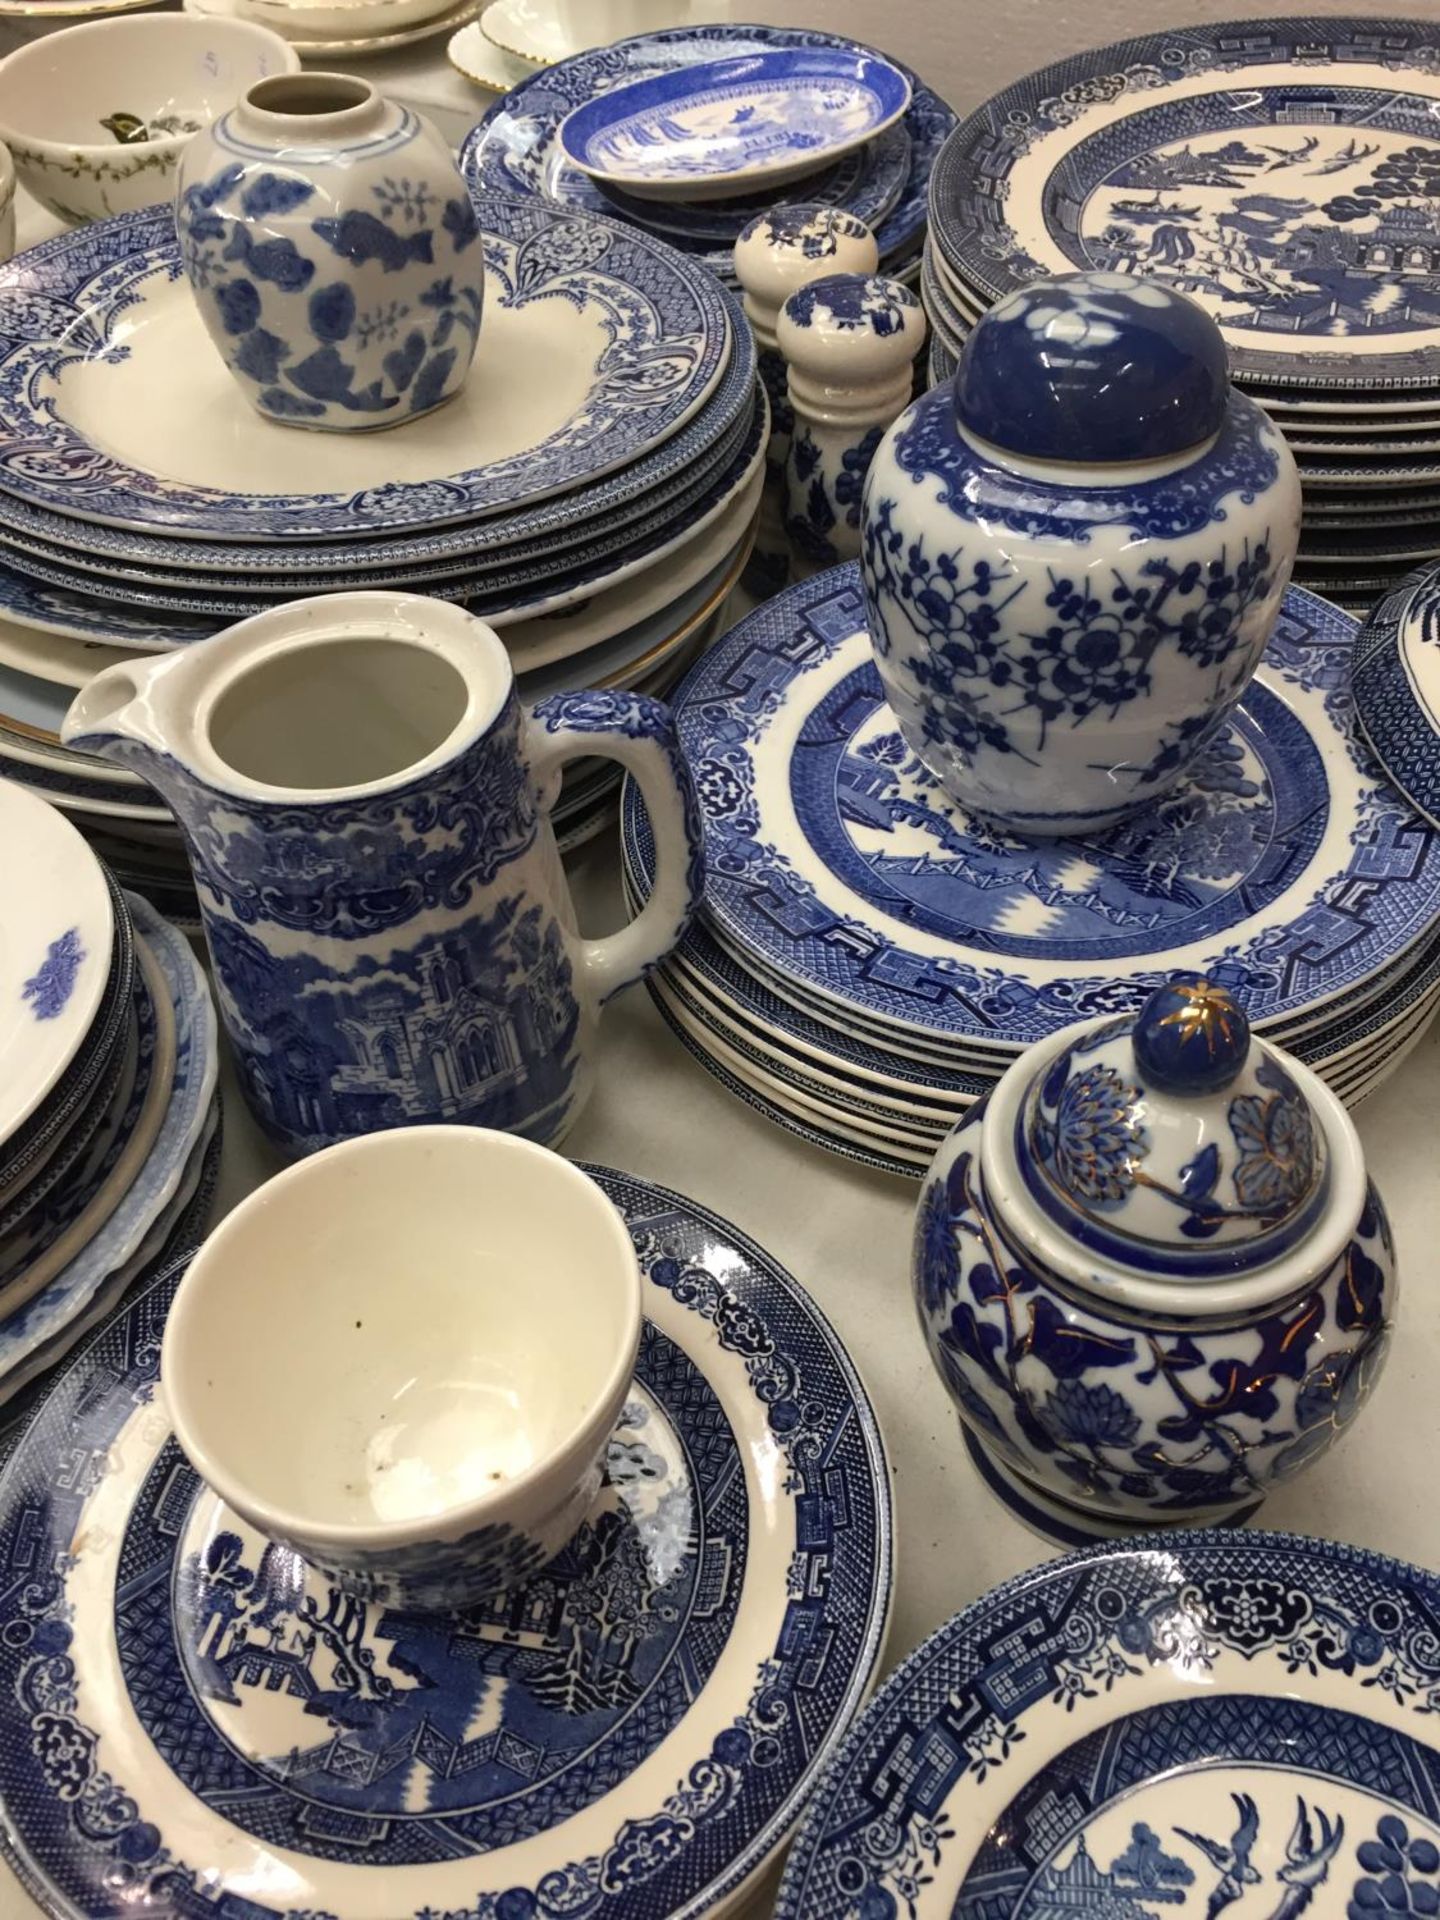 A LARGE SELECTION OF MAINLY, BLUE WILLOW PATTERN CHINA PLATES ALONG WITH A CRUET SET AND GINGER JARS - Image 6 of 6